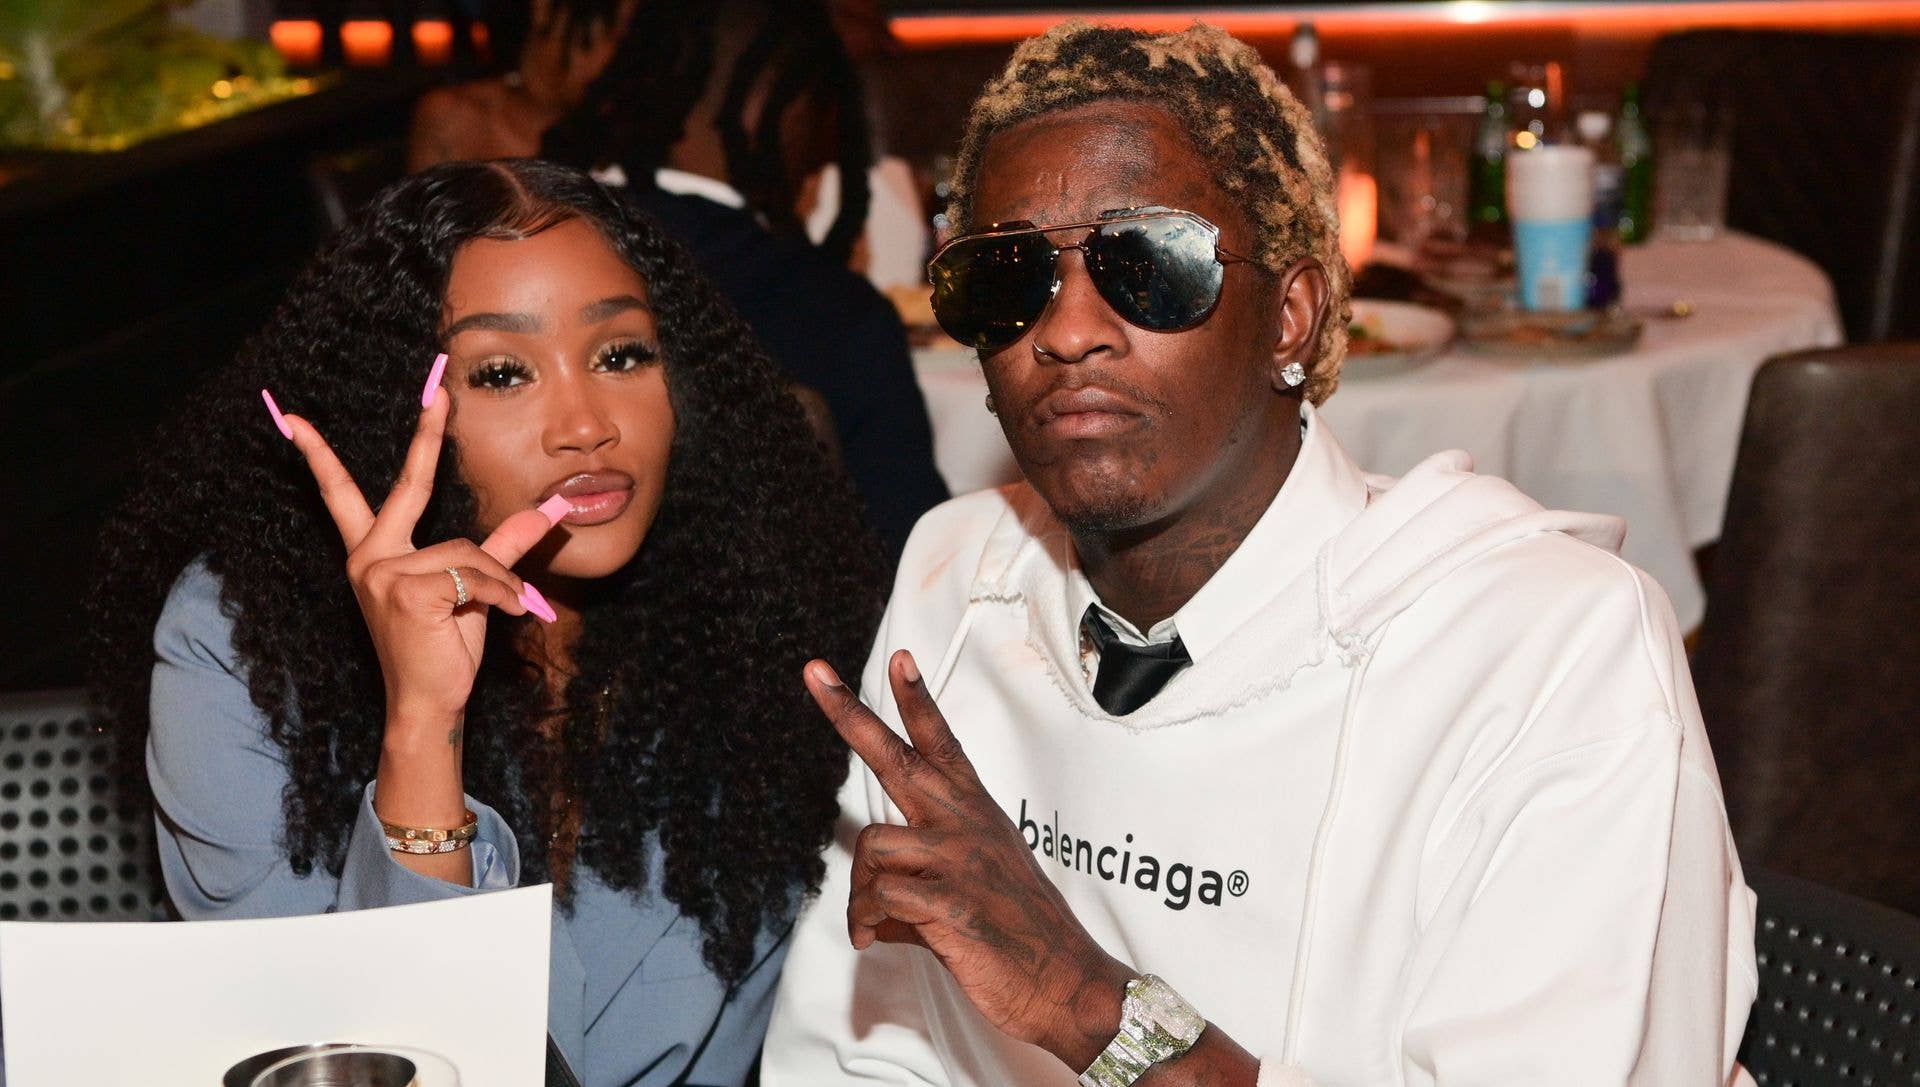 Jerrika Karlae and Young Thug attend Slime Language 2 #1 Album Event